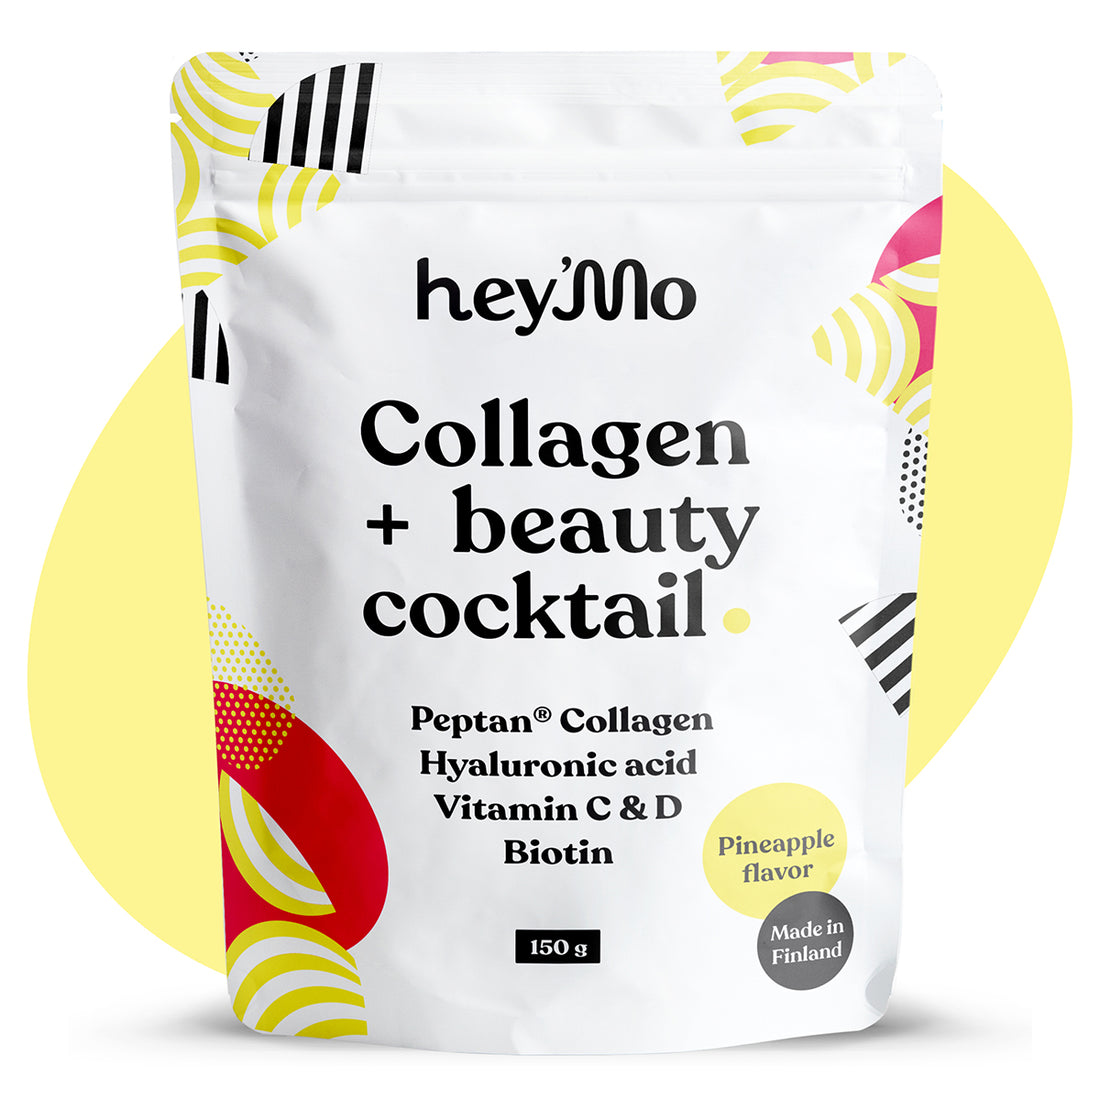 Collagen + beauty cocktail Pineapple